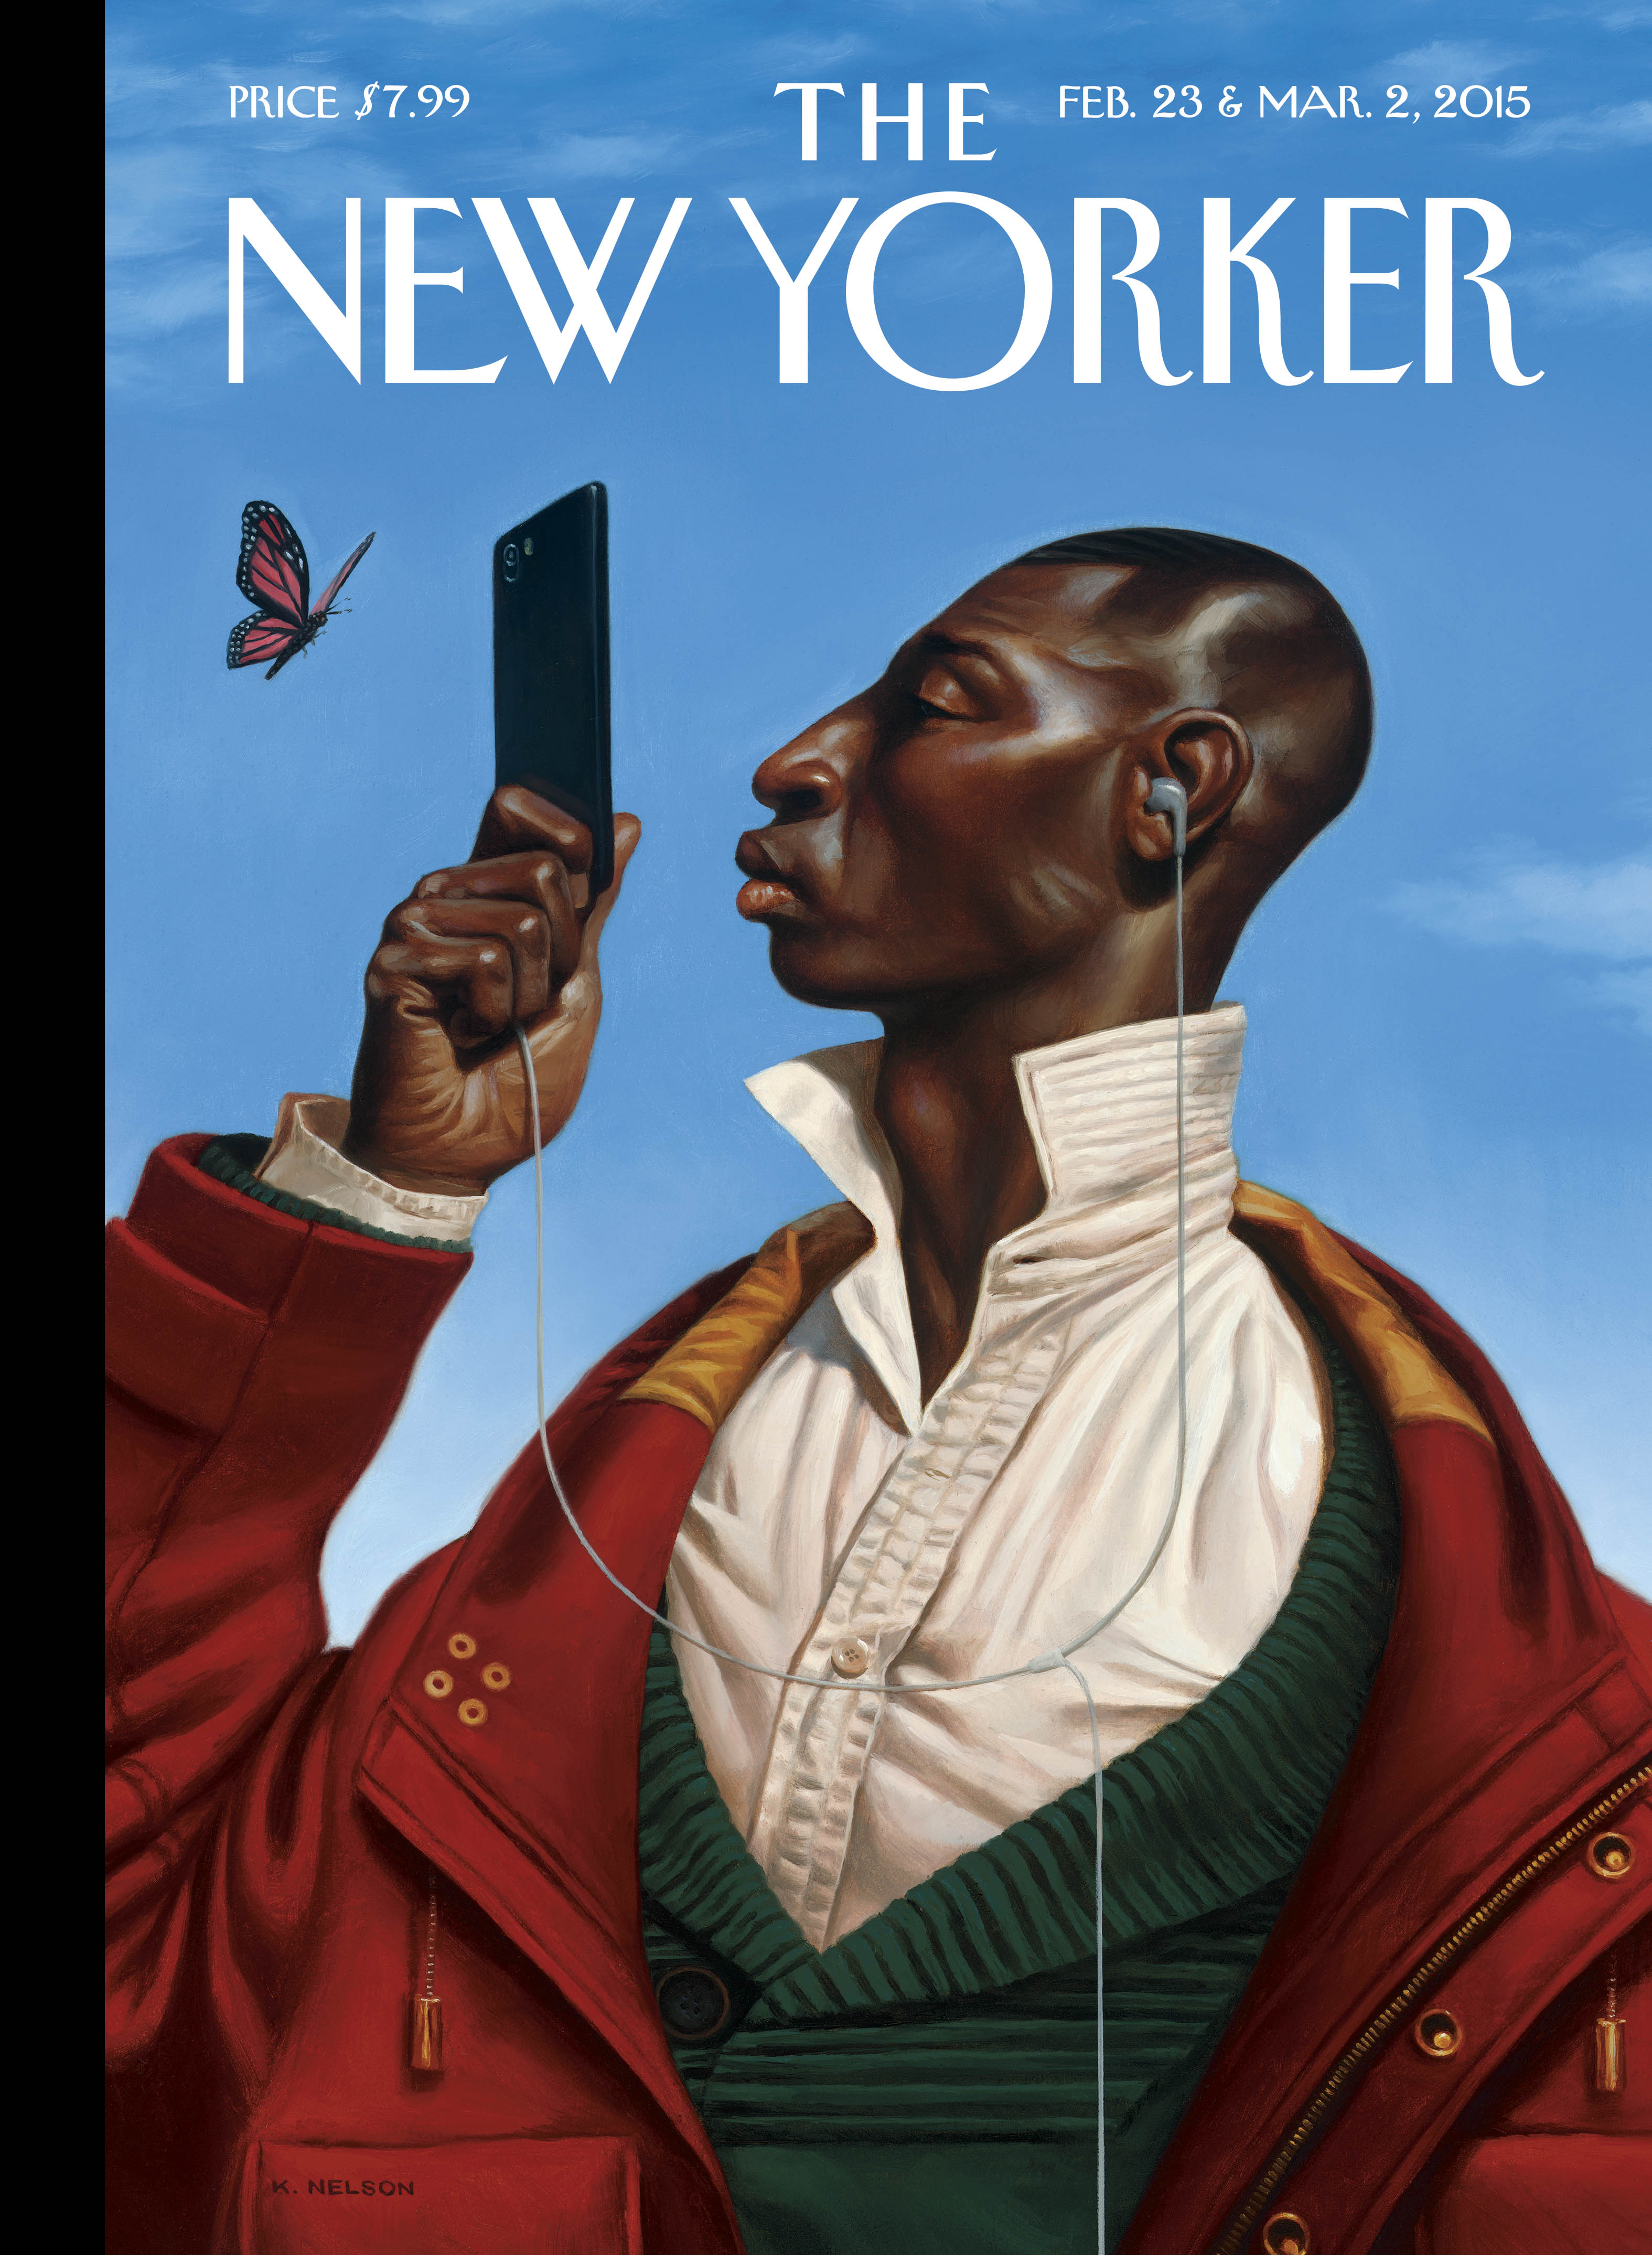 The New Yorker-"90th Anniversary [Eustace Tilley]," February 23